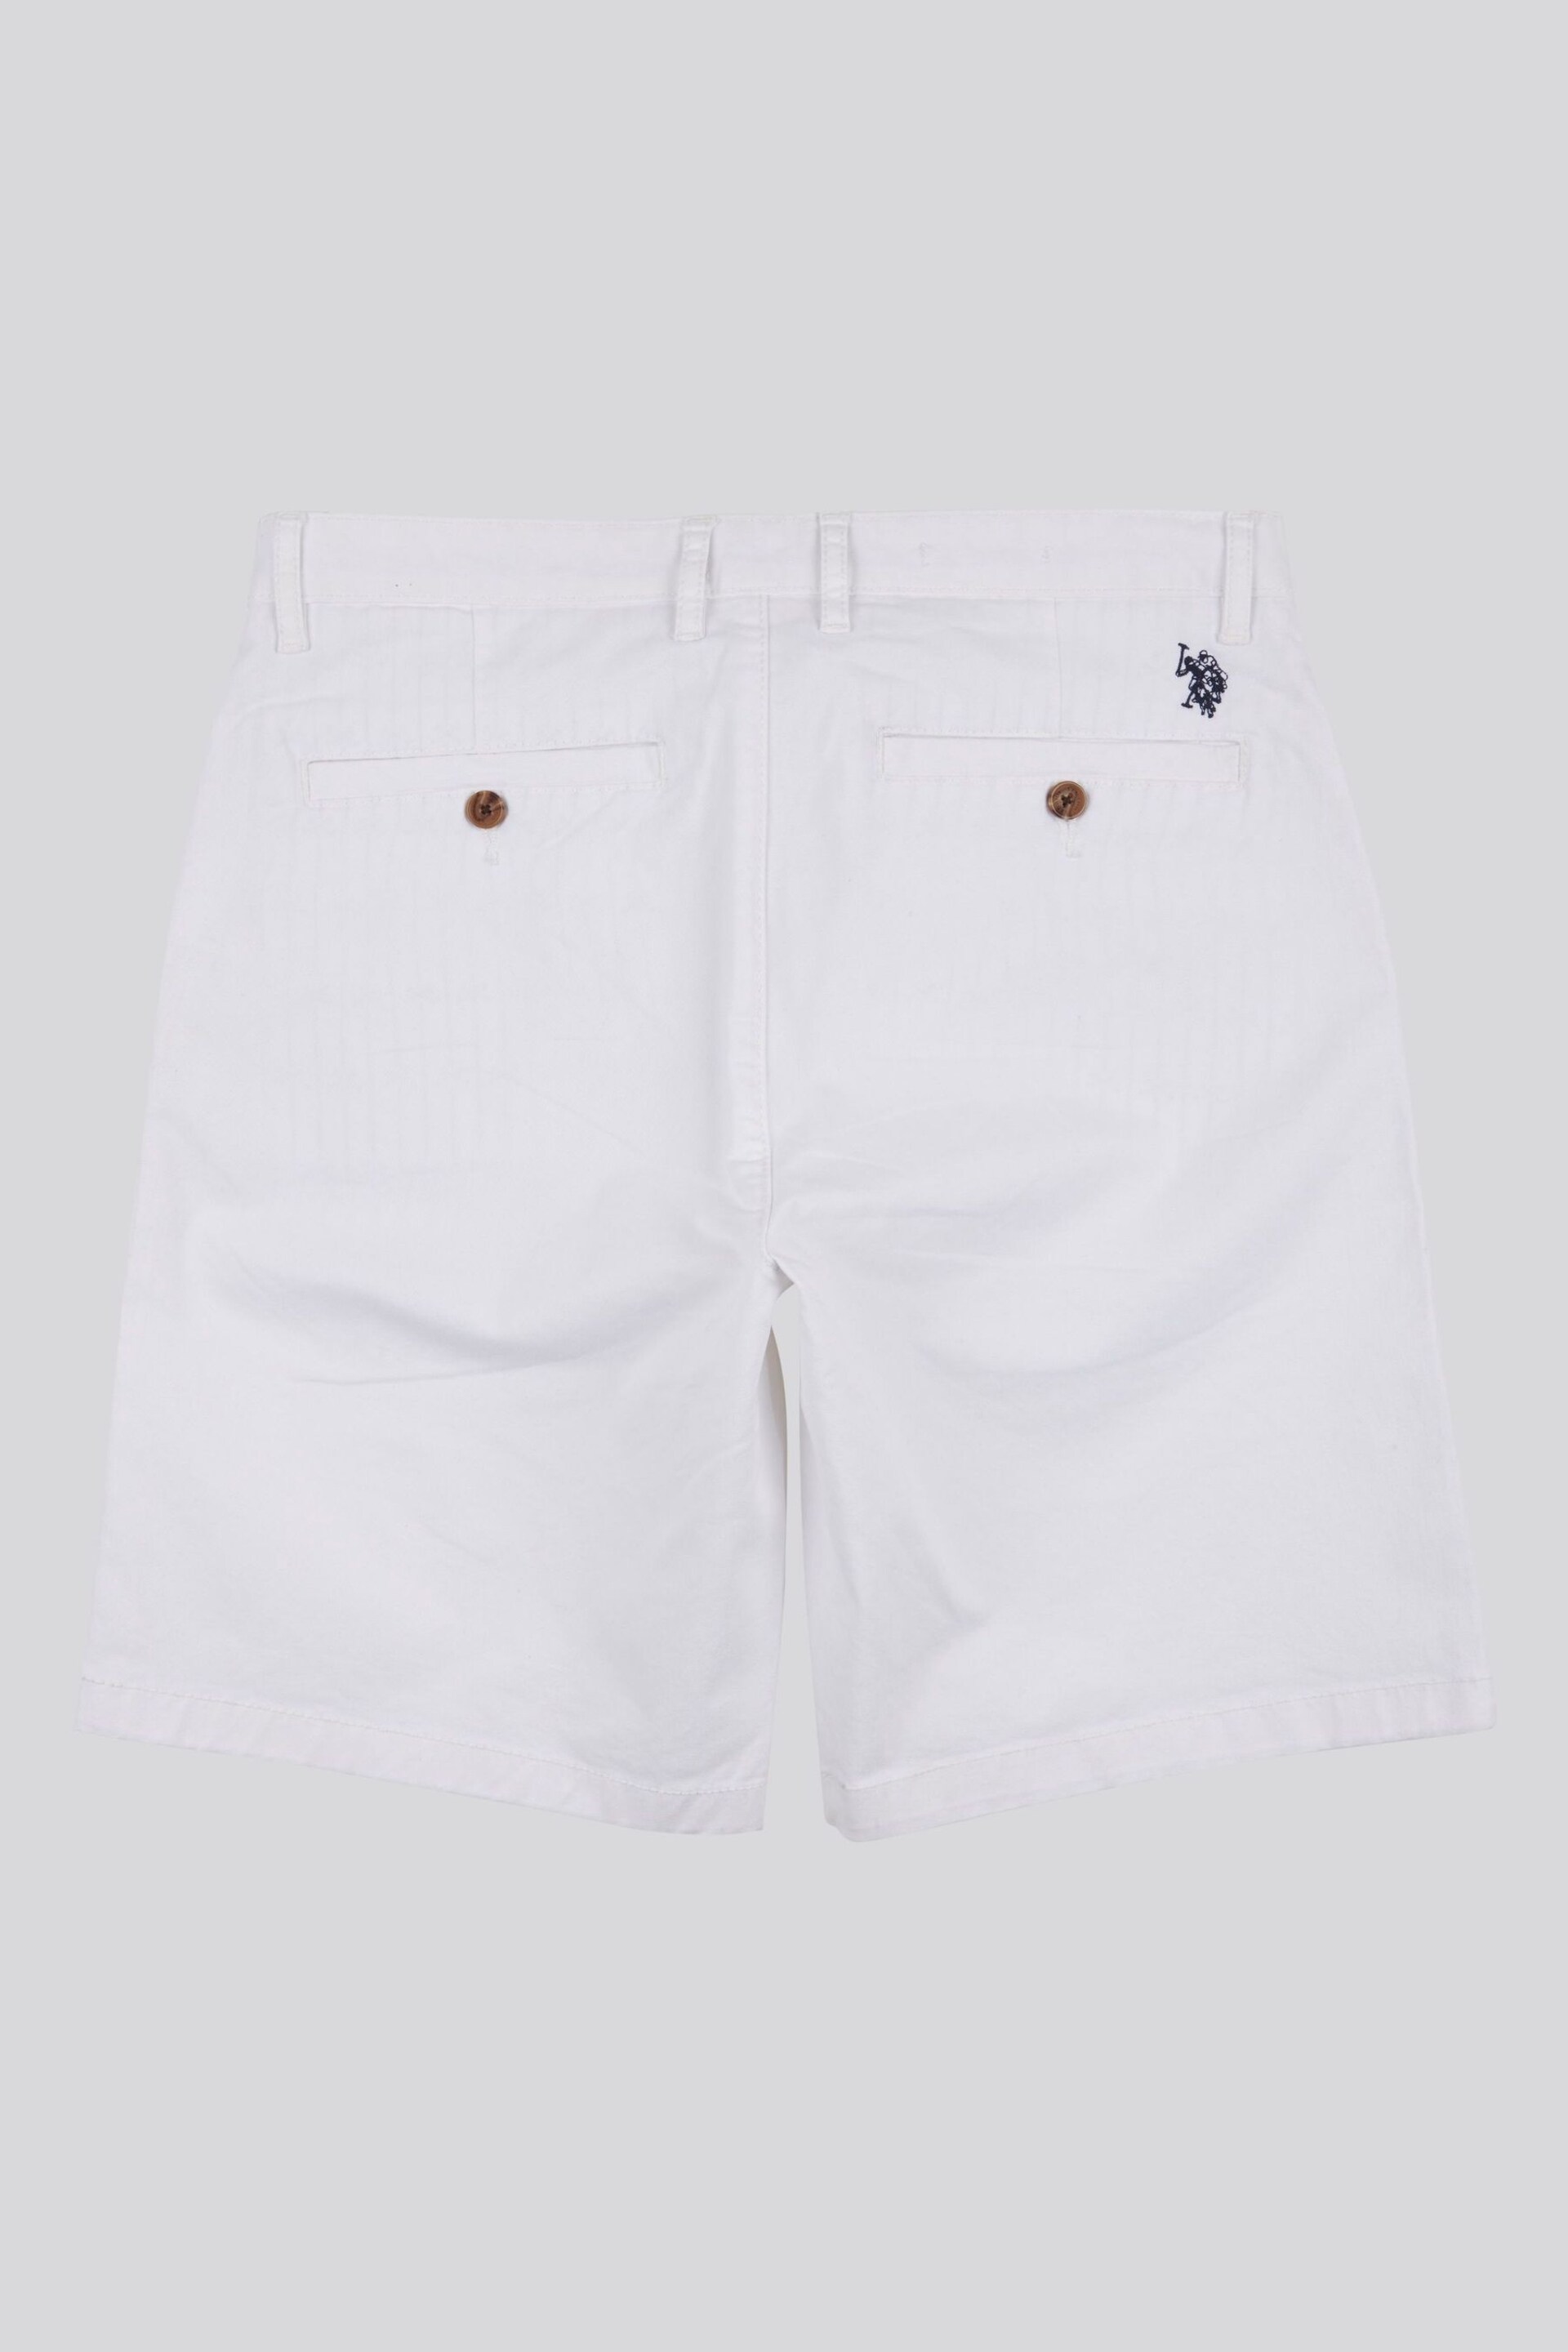 U.S. Polo Assn. Mens Classic Chinos Shorts - Image 7 of 9